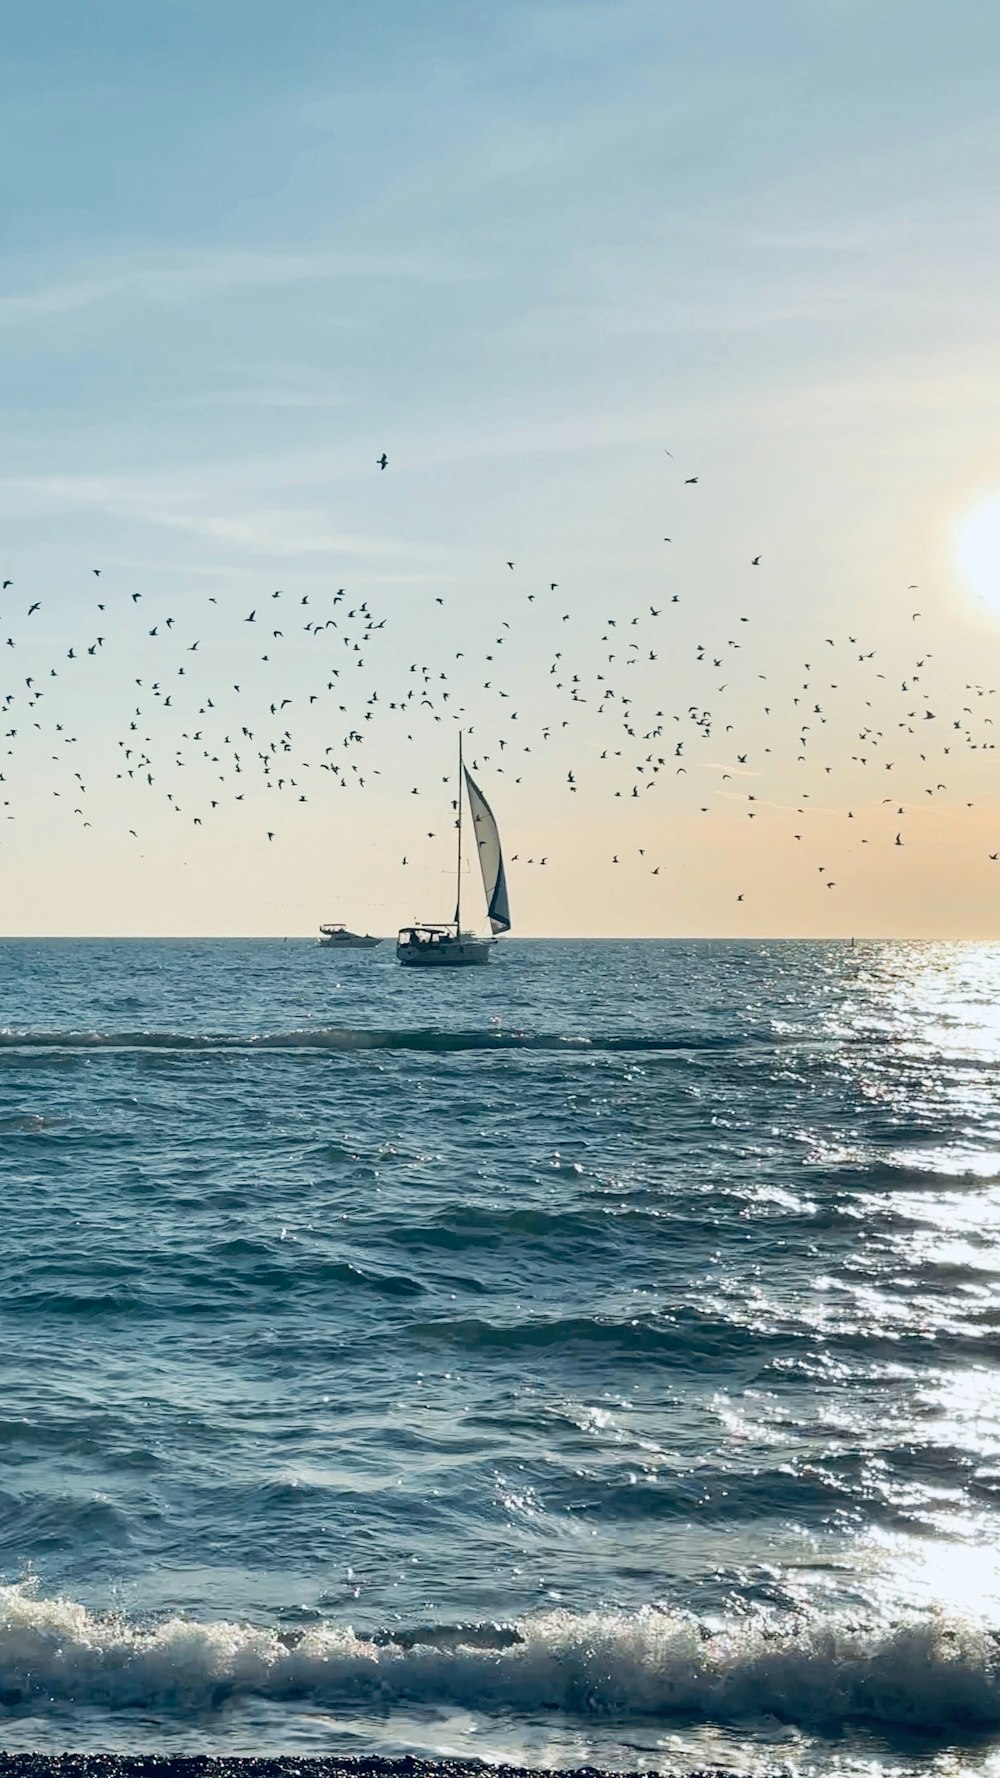 a sailboat in the ocean with a flock of birds in the sky